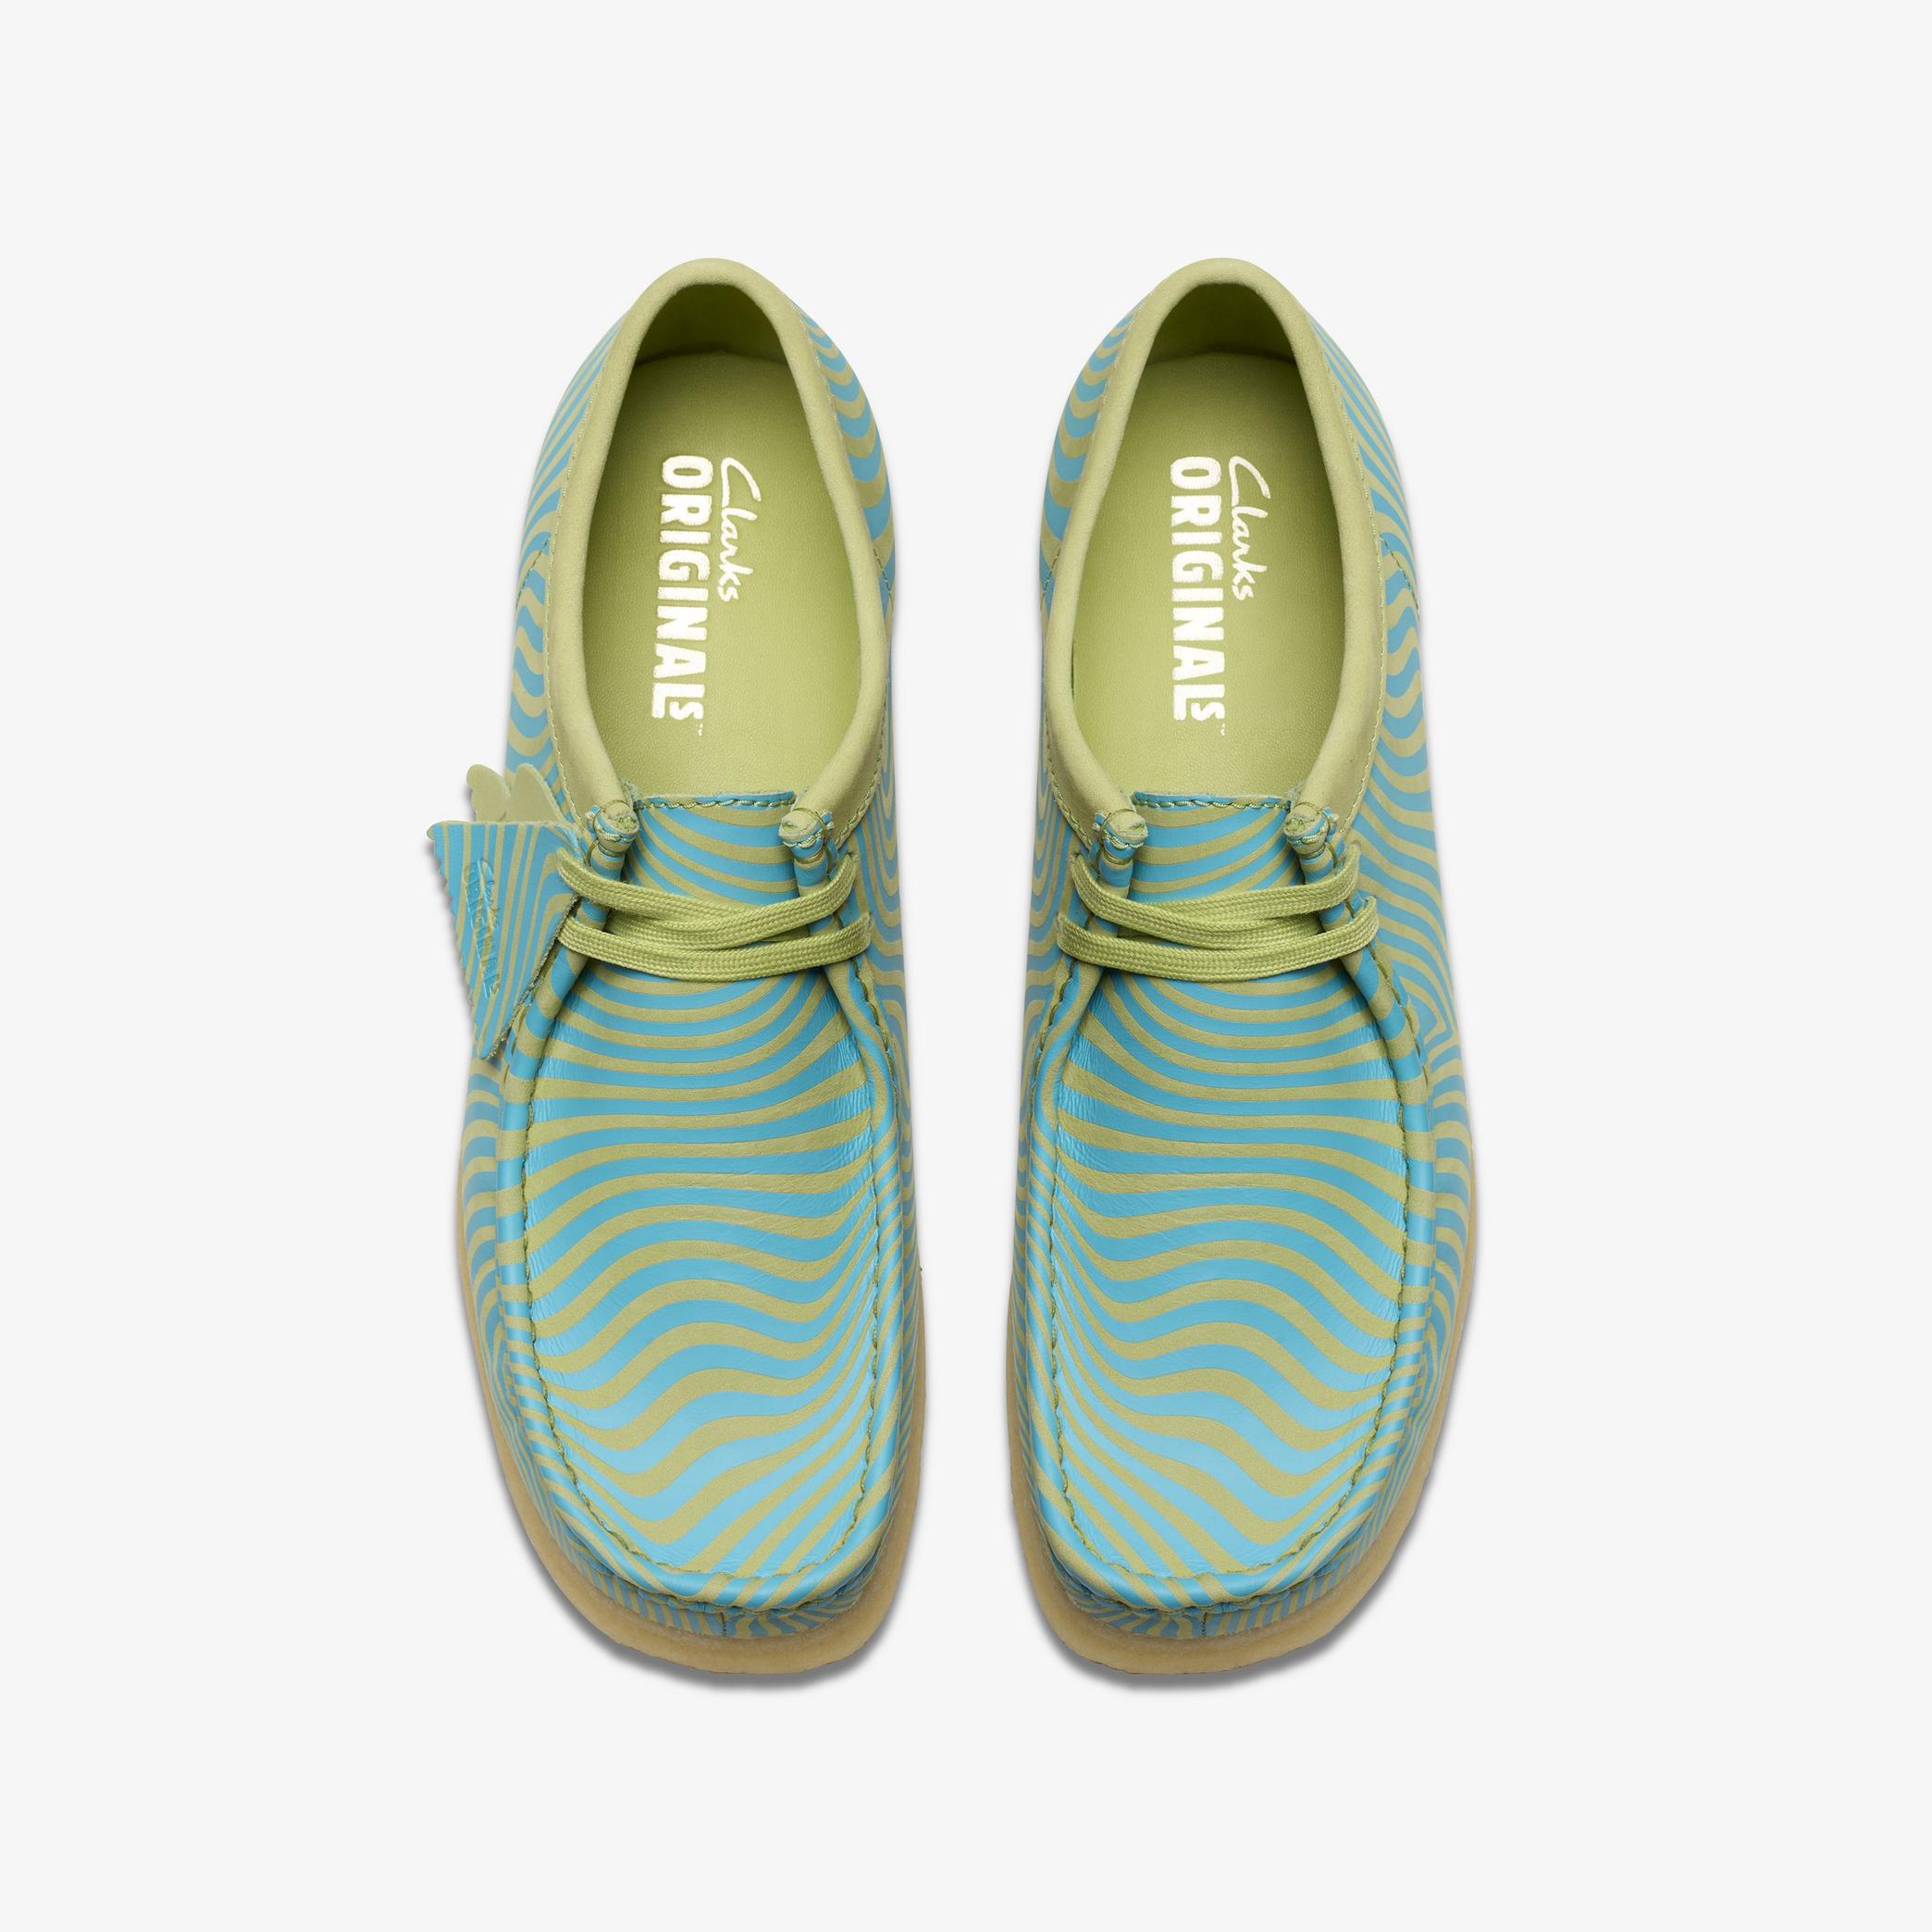 Wallabee Blue/Lime Print Wallabee, view 6 of 7